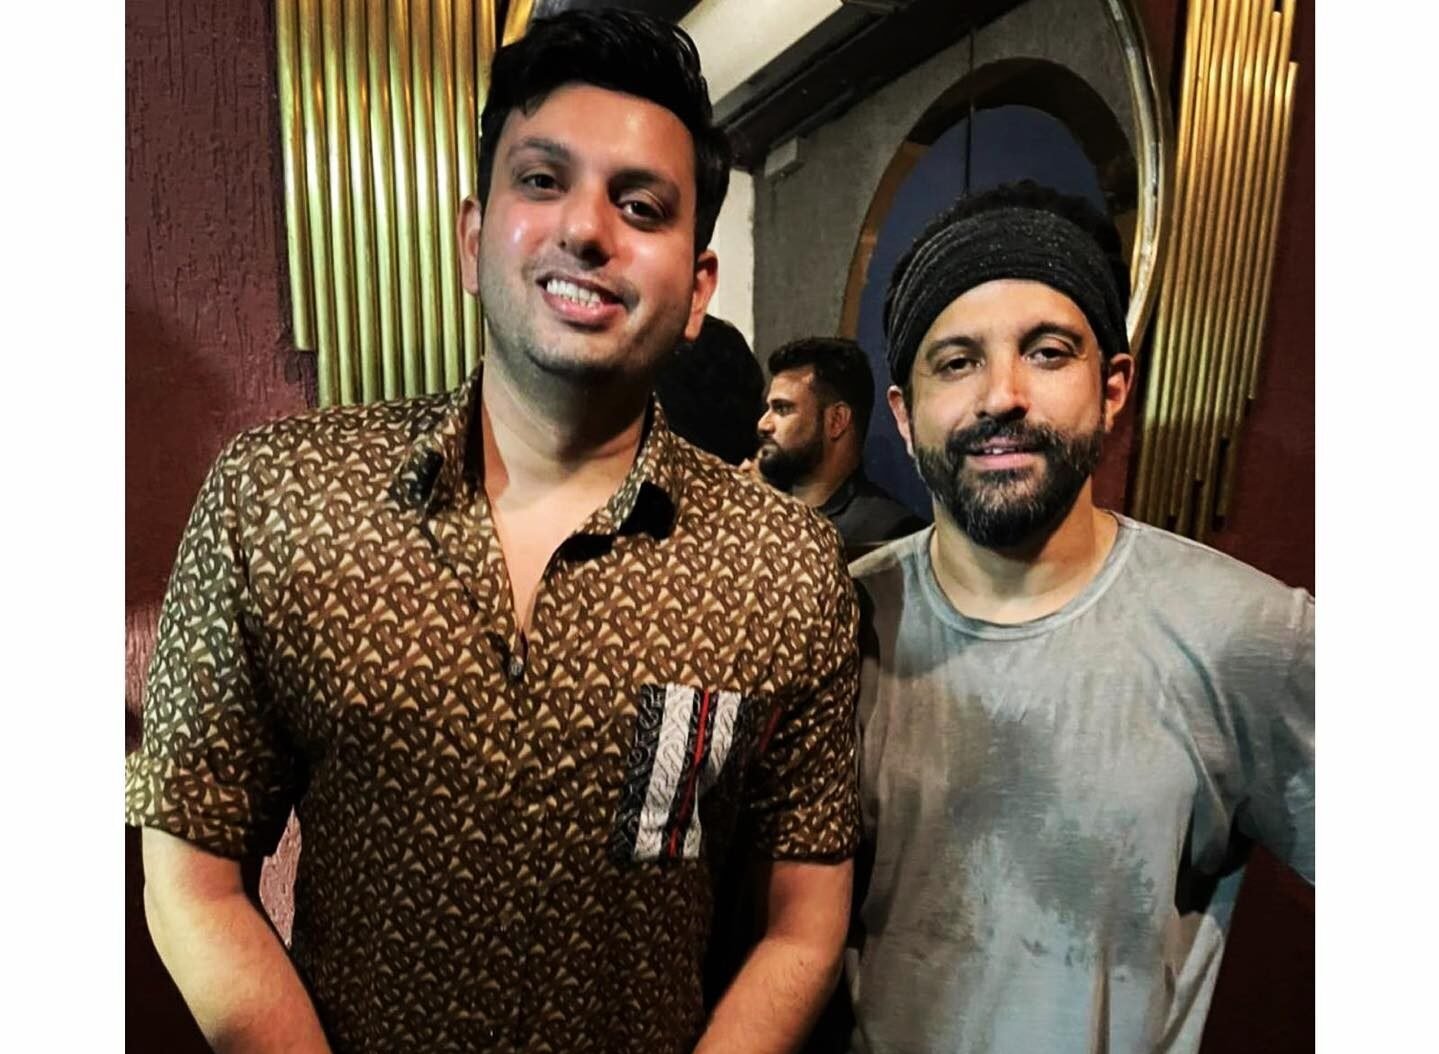 Teri Meri Kahani Mashup Fame DJ Sahil Gulati Join Hands With Music Mogul Avadh Nagpal, Says, “I do want to change that mentality and make DJing accepted as a real profession and not a hobby”